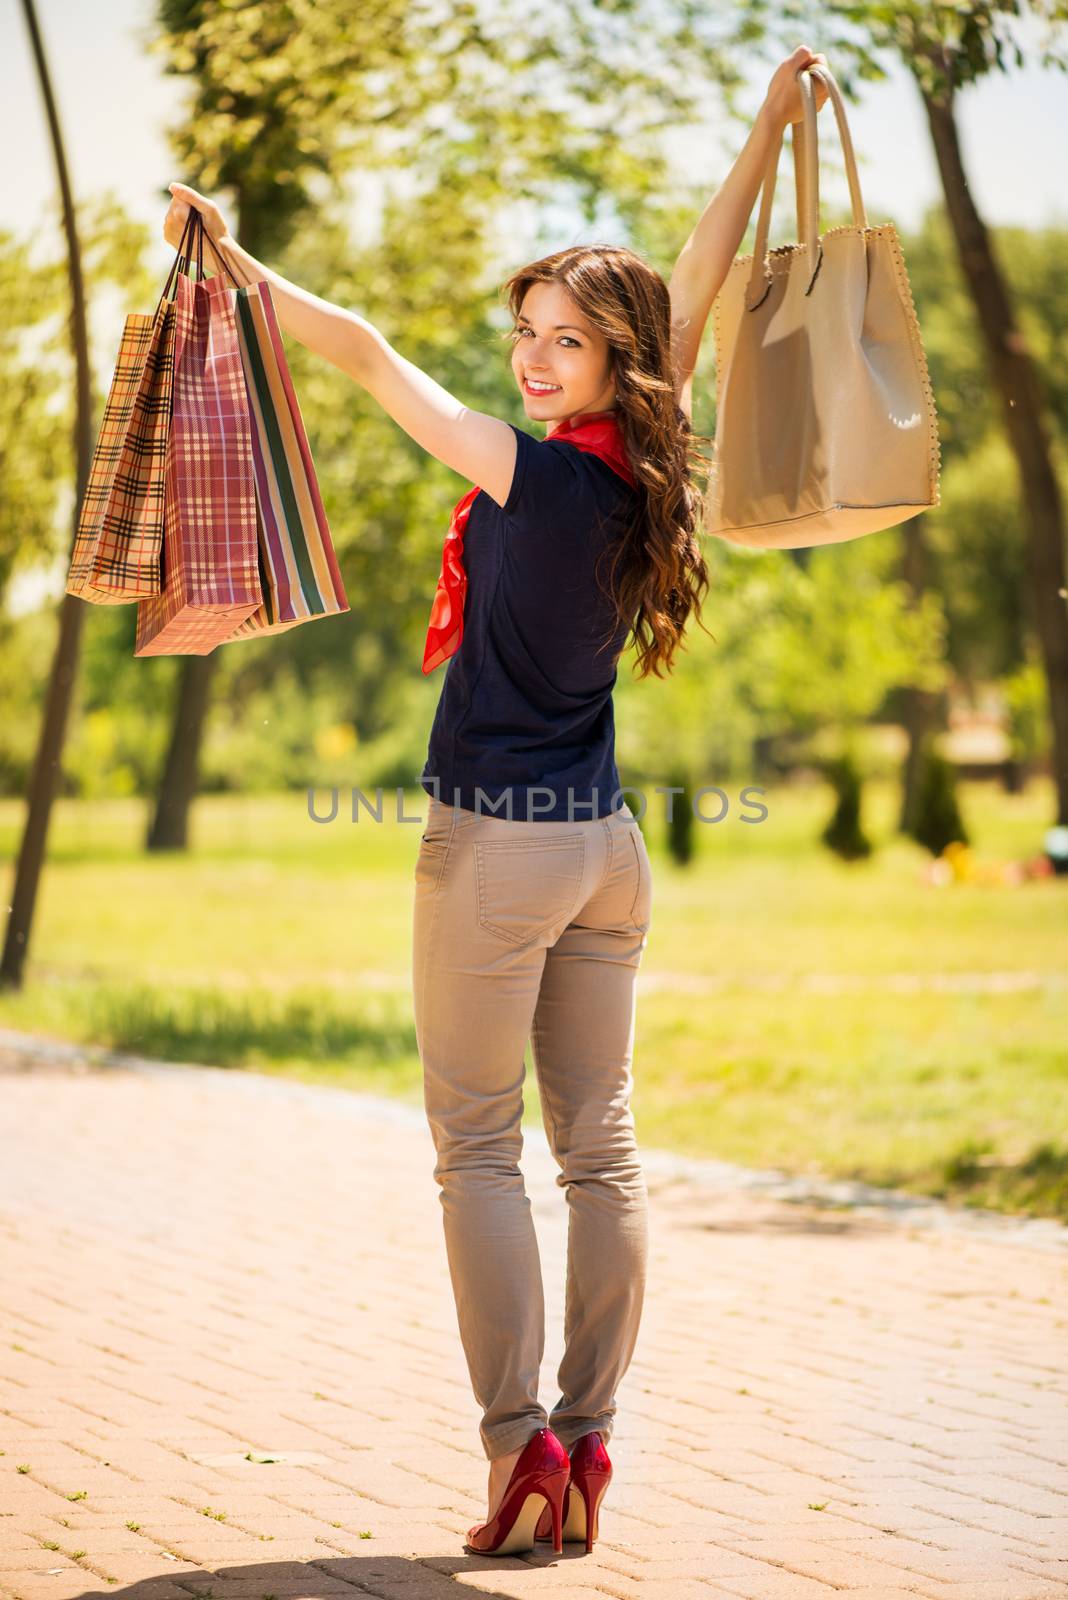 Beautiful young woman walking in the park and holding shopping bags.